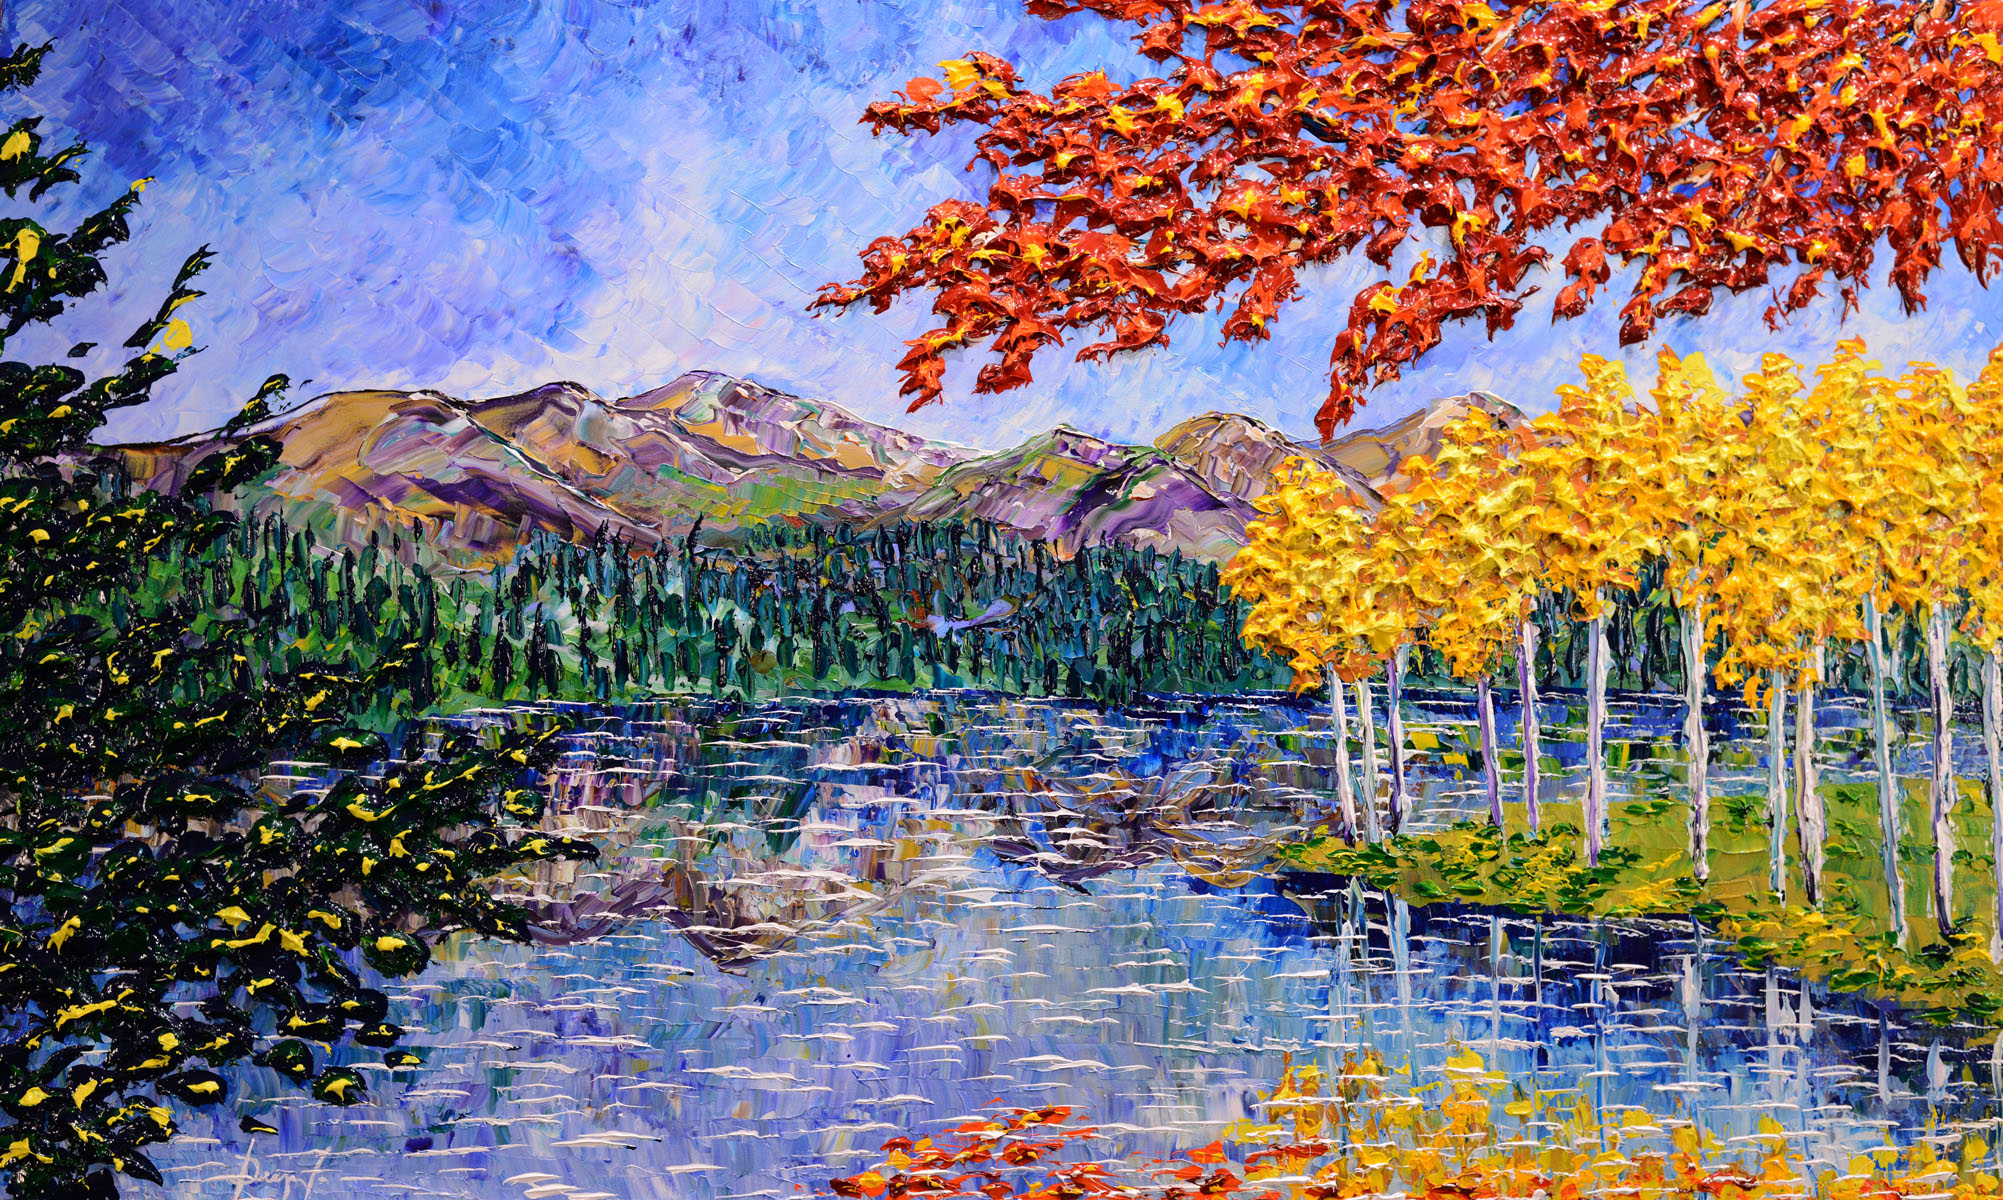 “Nature’s Reflection Along the Mountains” 36x60”